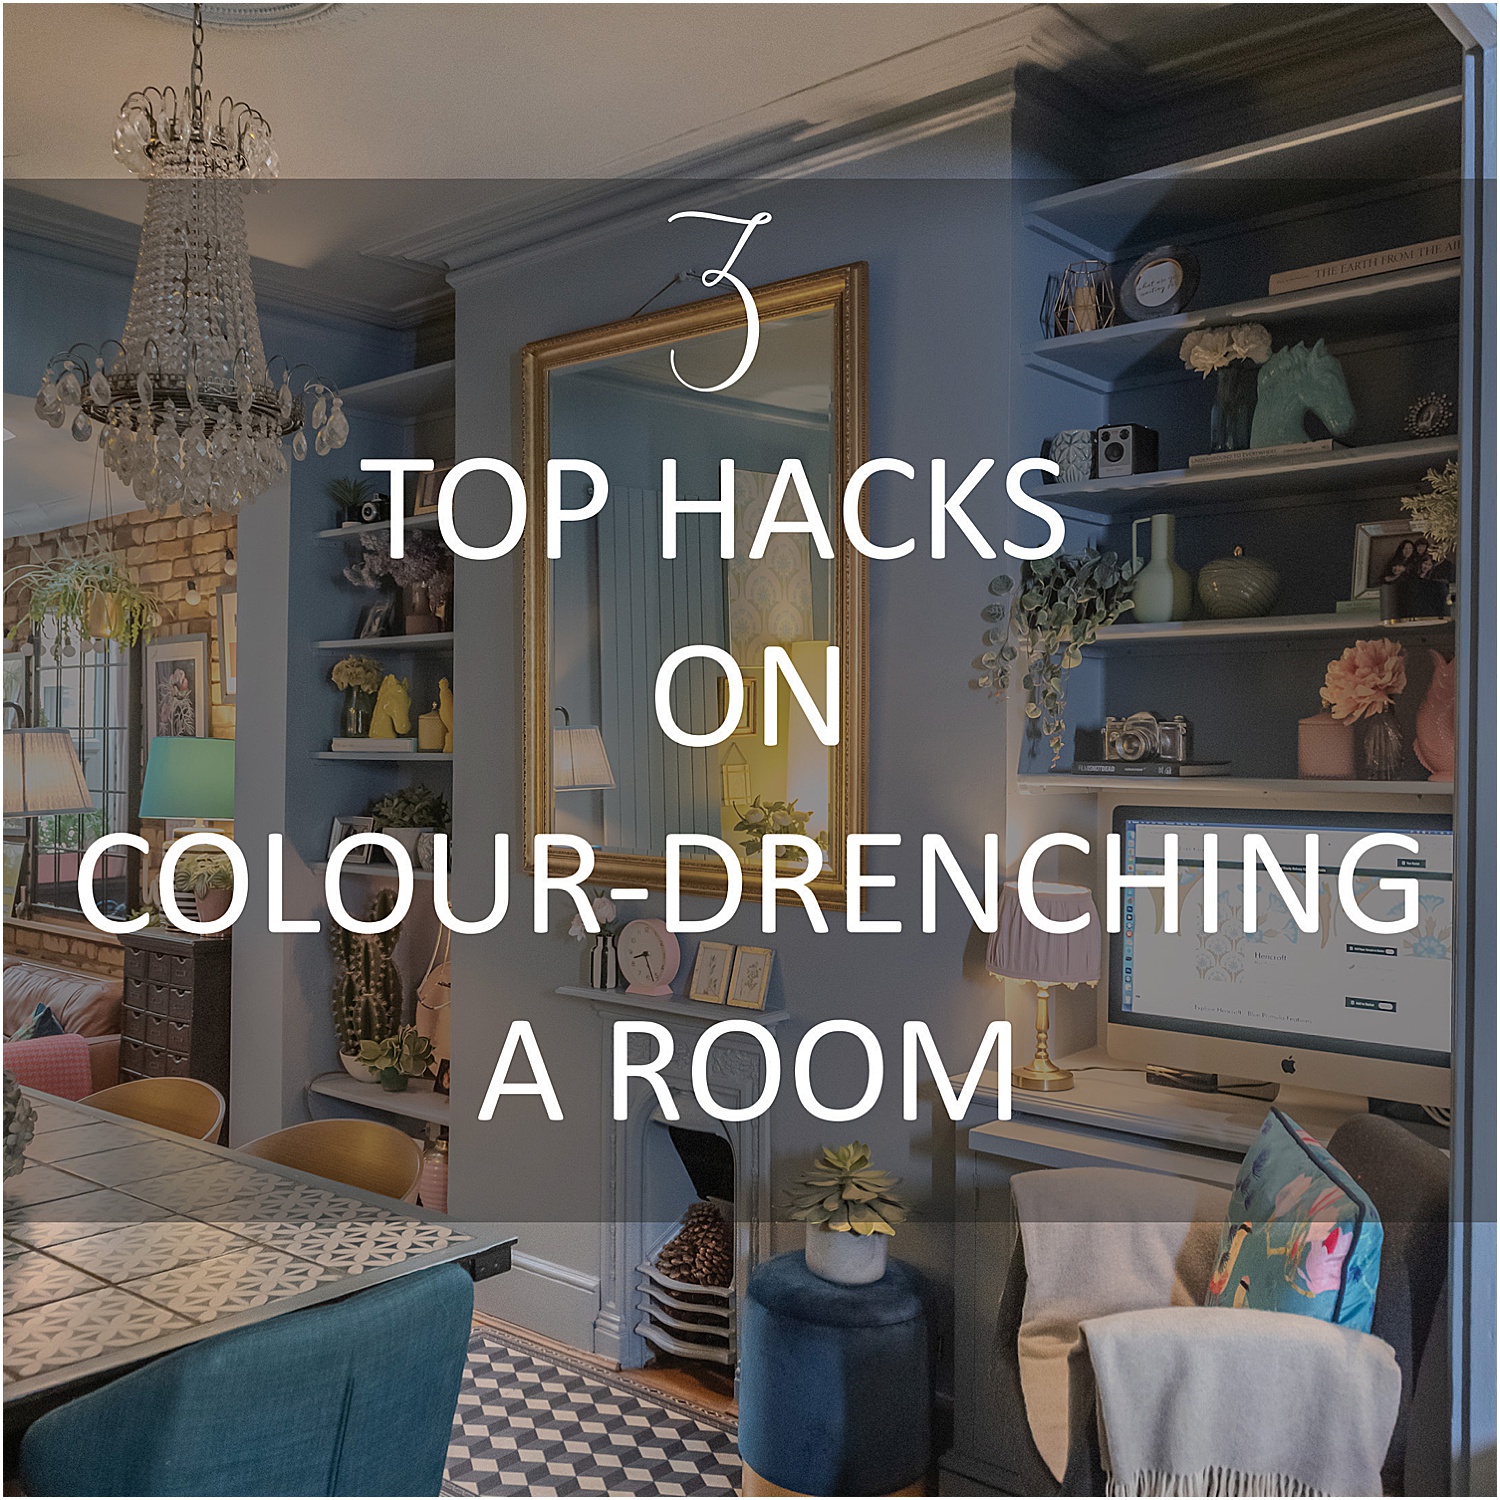 3-top-hacks-on-Colour-Drenching-a-room